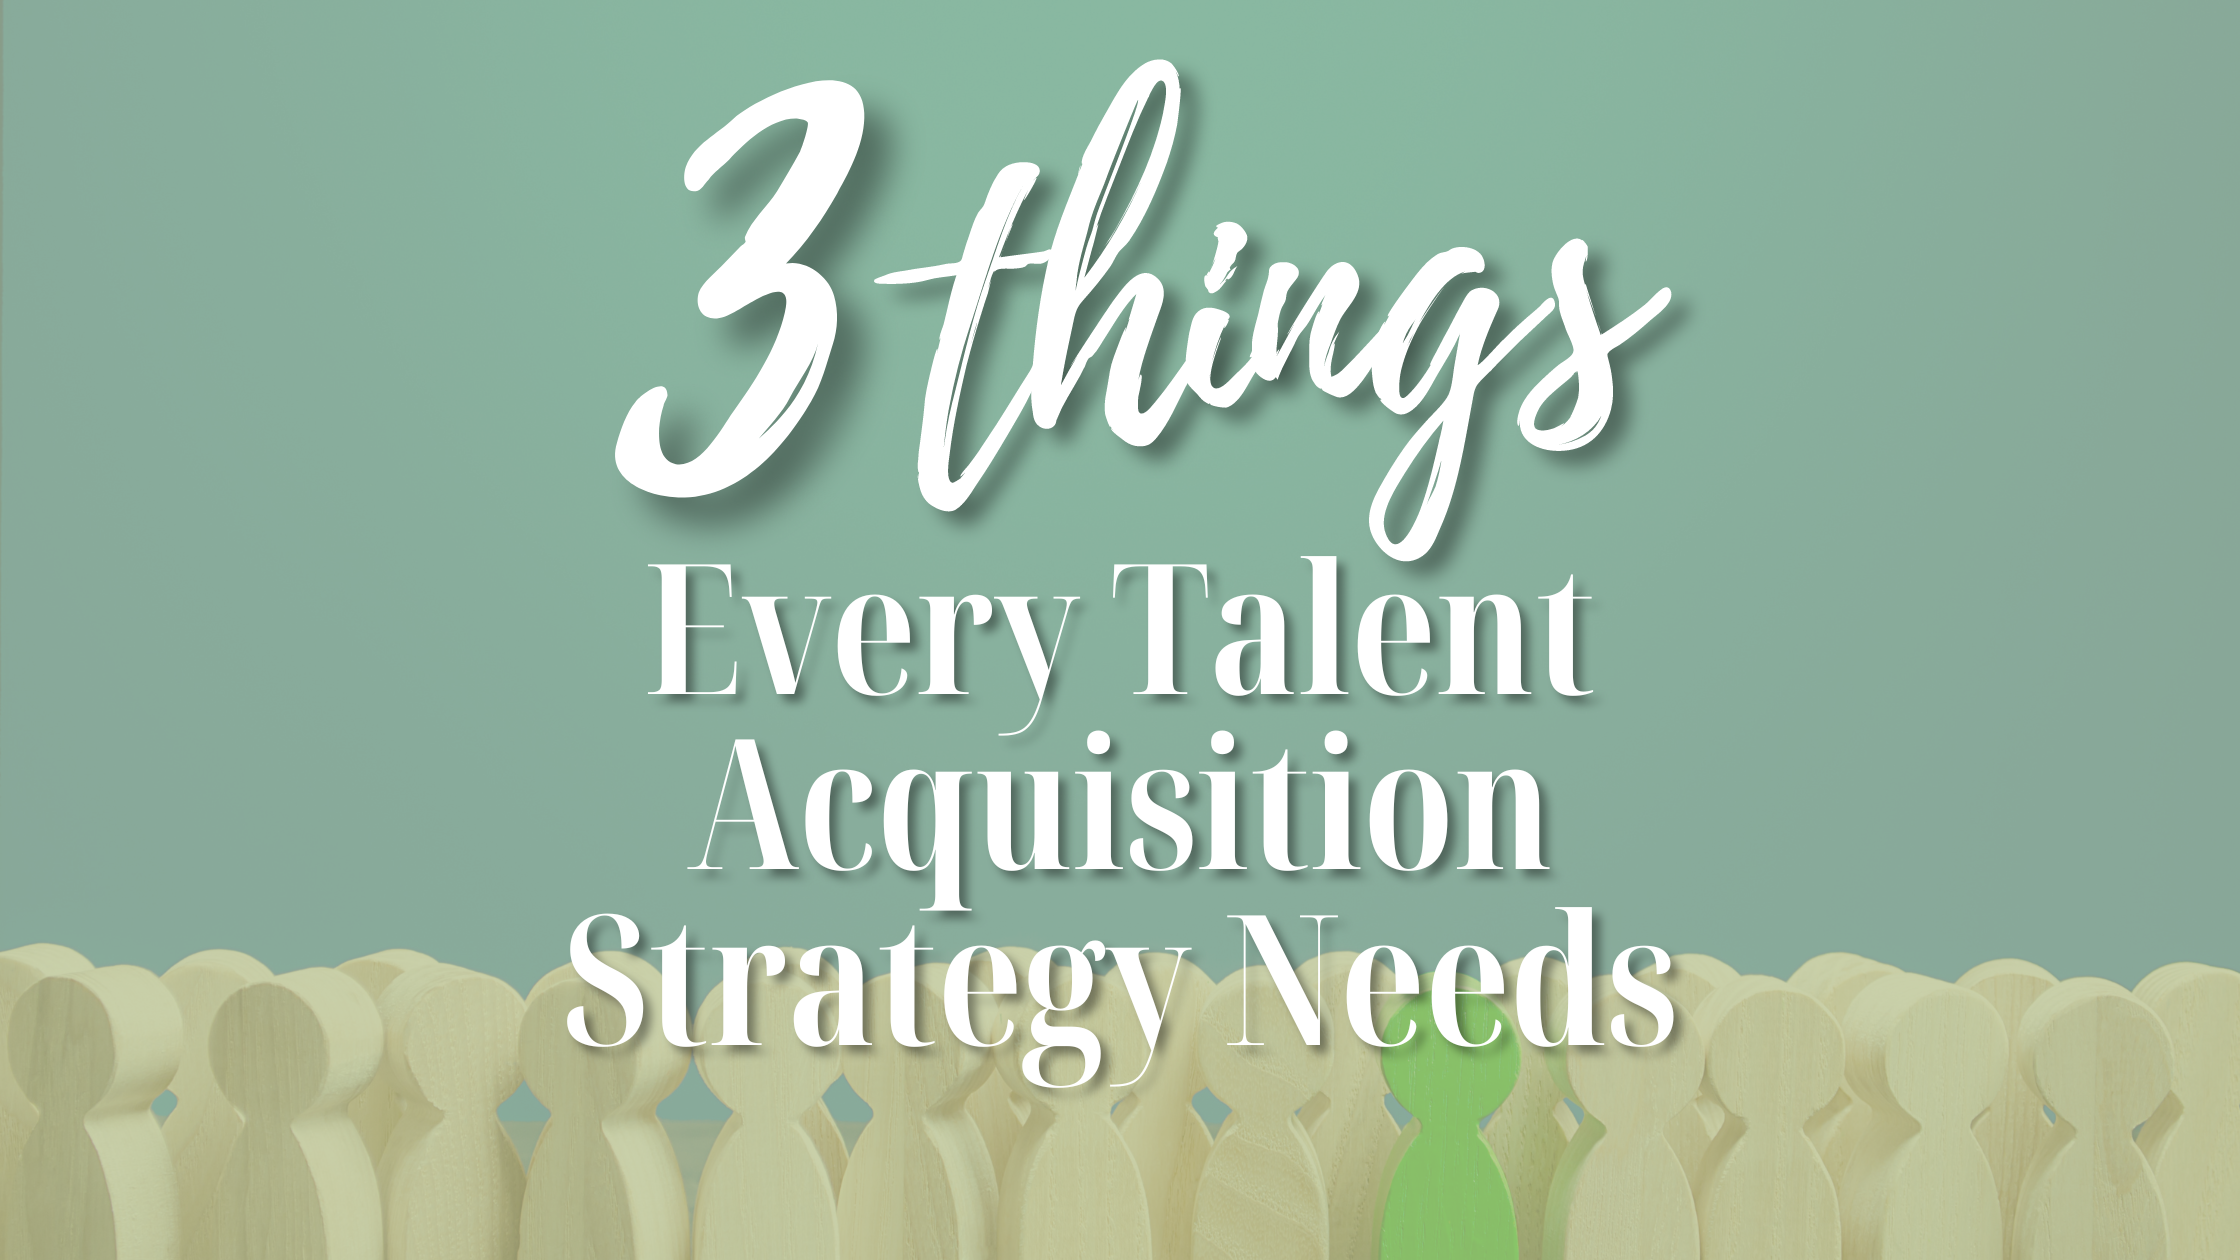 3 Things Every Talent Acquisition Strategy Needs